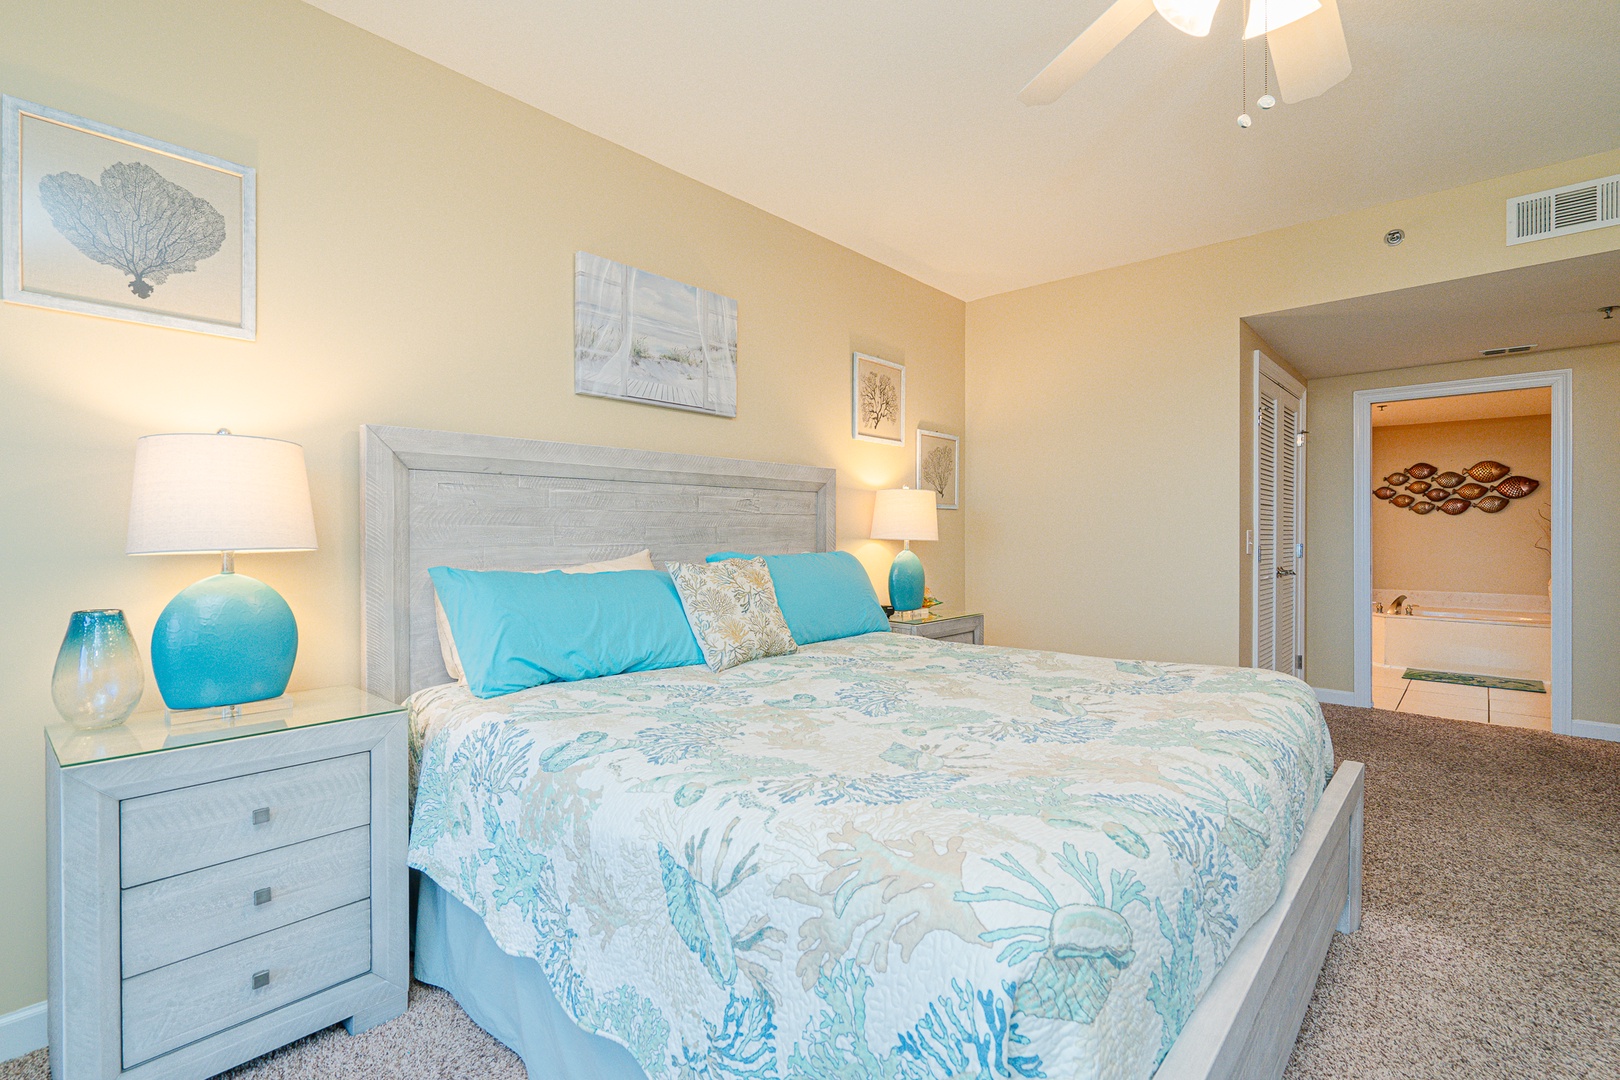 The king suite boasts a private ensuite, TV, & gorgeous water views